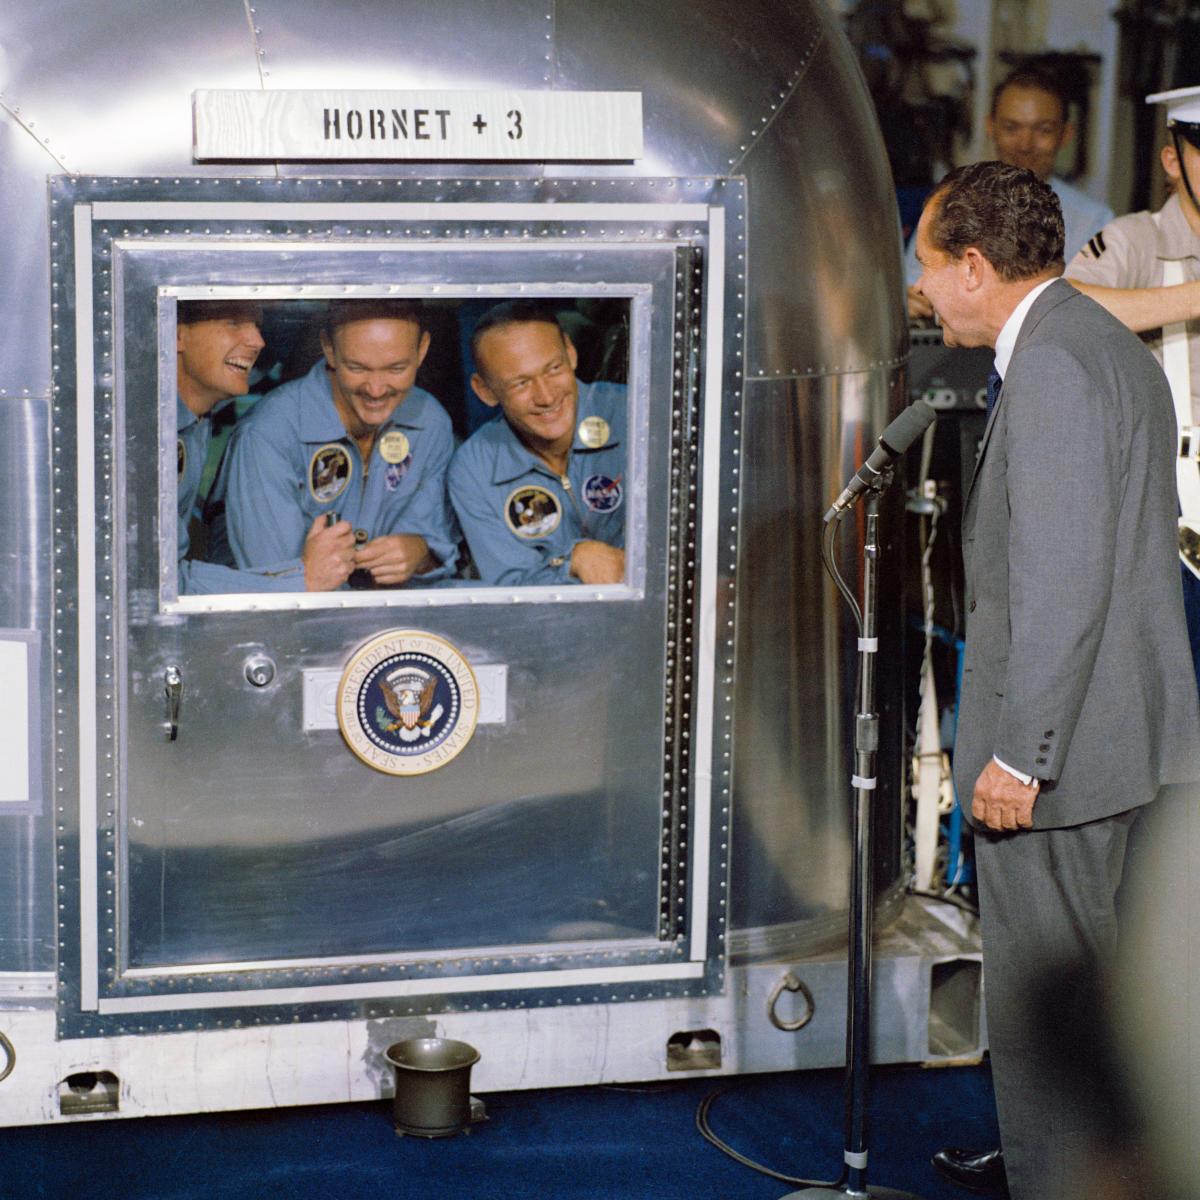 President Nixon speaks to the Apollo 11 astronauts aboard the USS Hornet.  The astronauts are in isolation.  The Hornet +3 is a reference to the 3 astronauts added to the USS Hornet's passengers and crew.